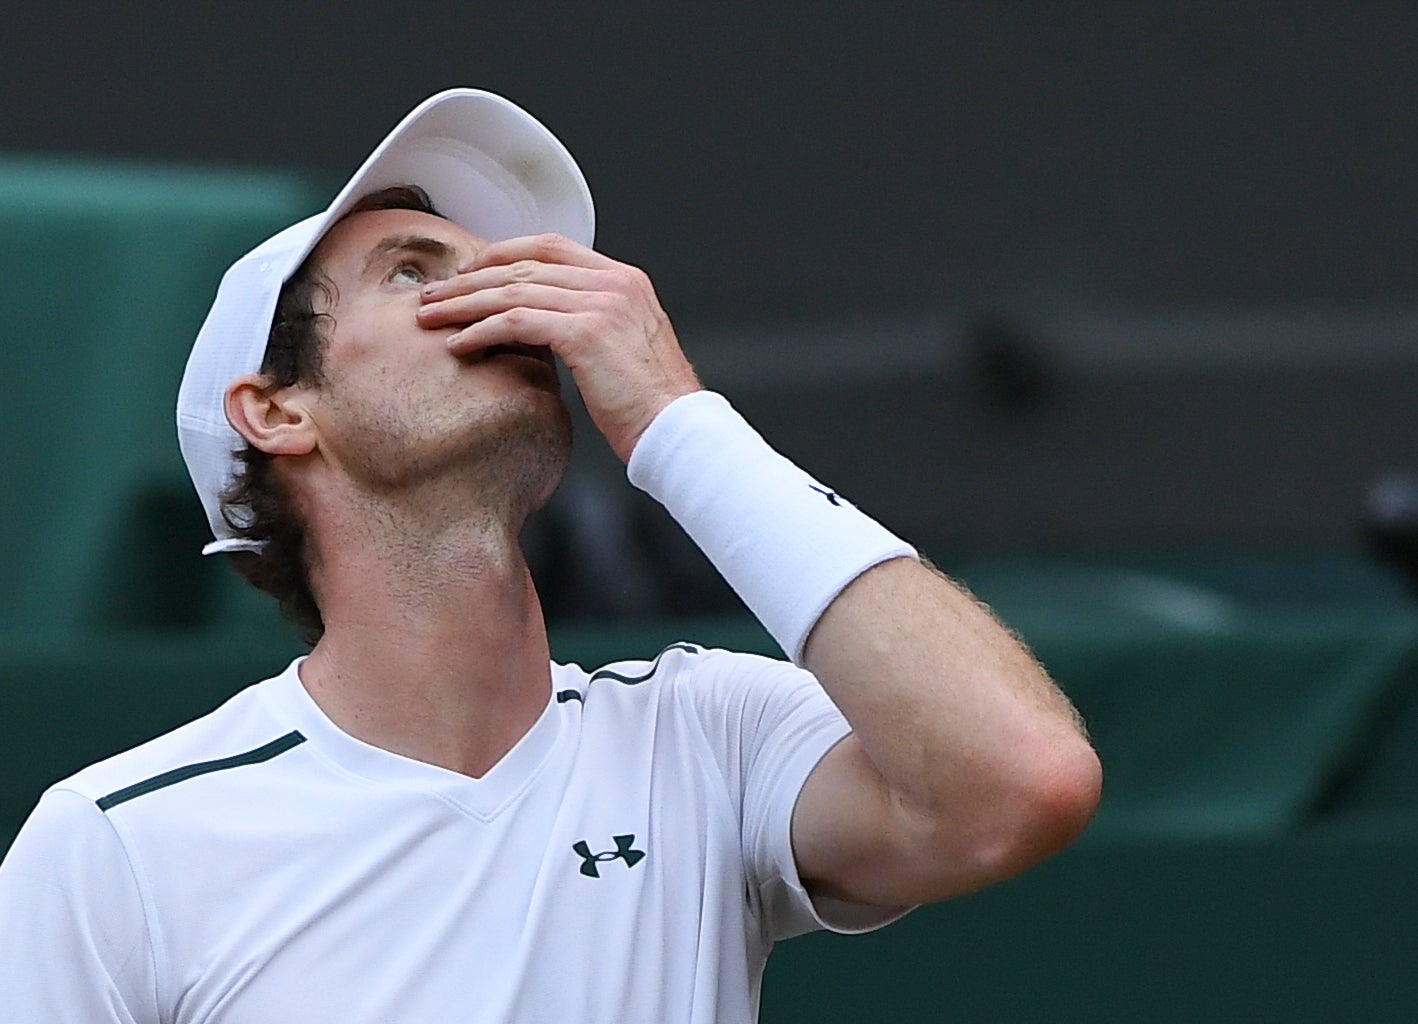 Murray could lose his world number one ranking today